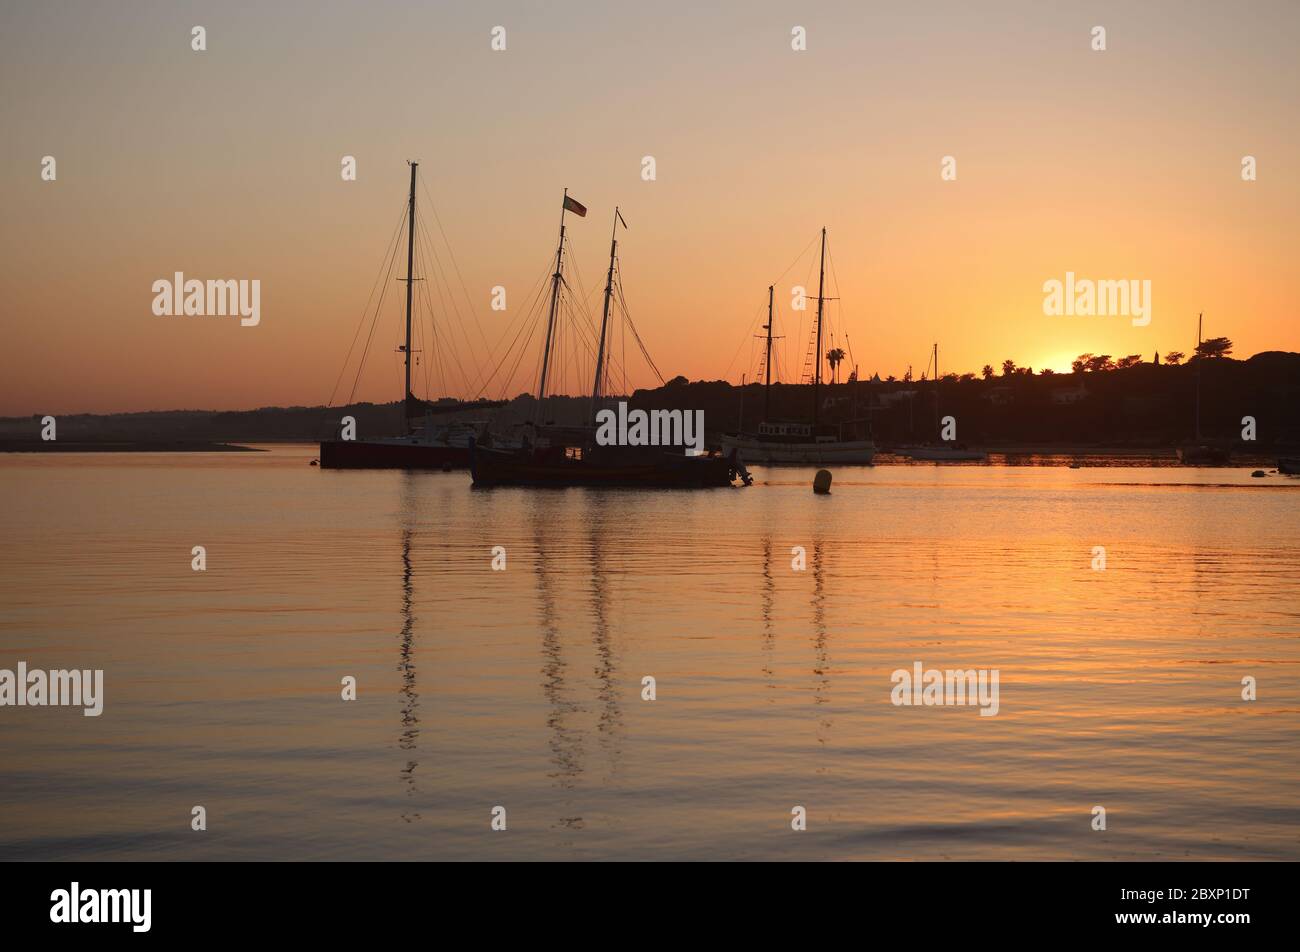 Portugal, Algarve, Portimao. Yachts and traditional boats moored in the Bay of Alvor at sunset. Alvor is a picturesque village and tourist resort. Stock Photo